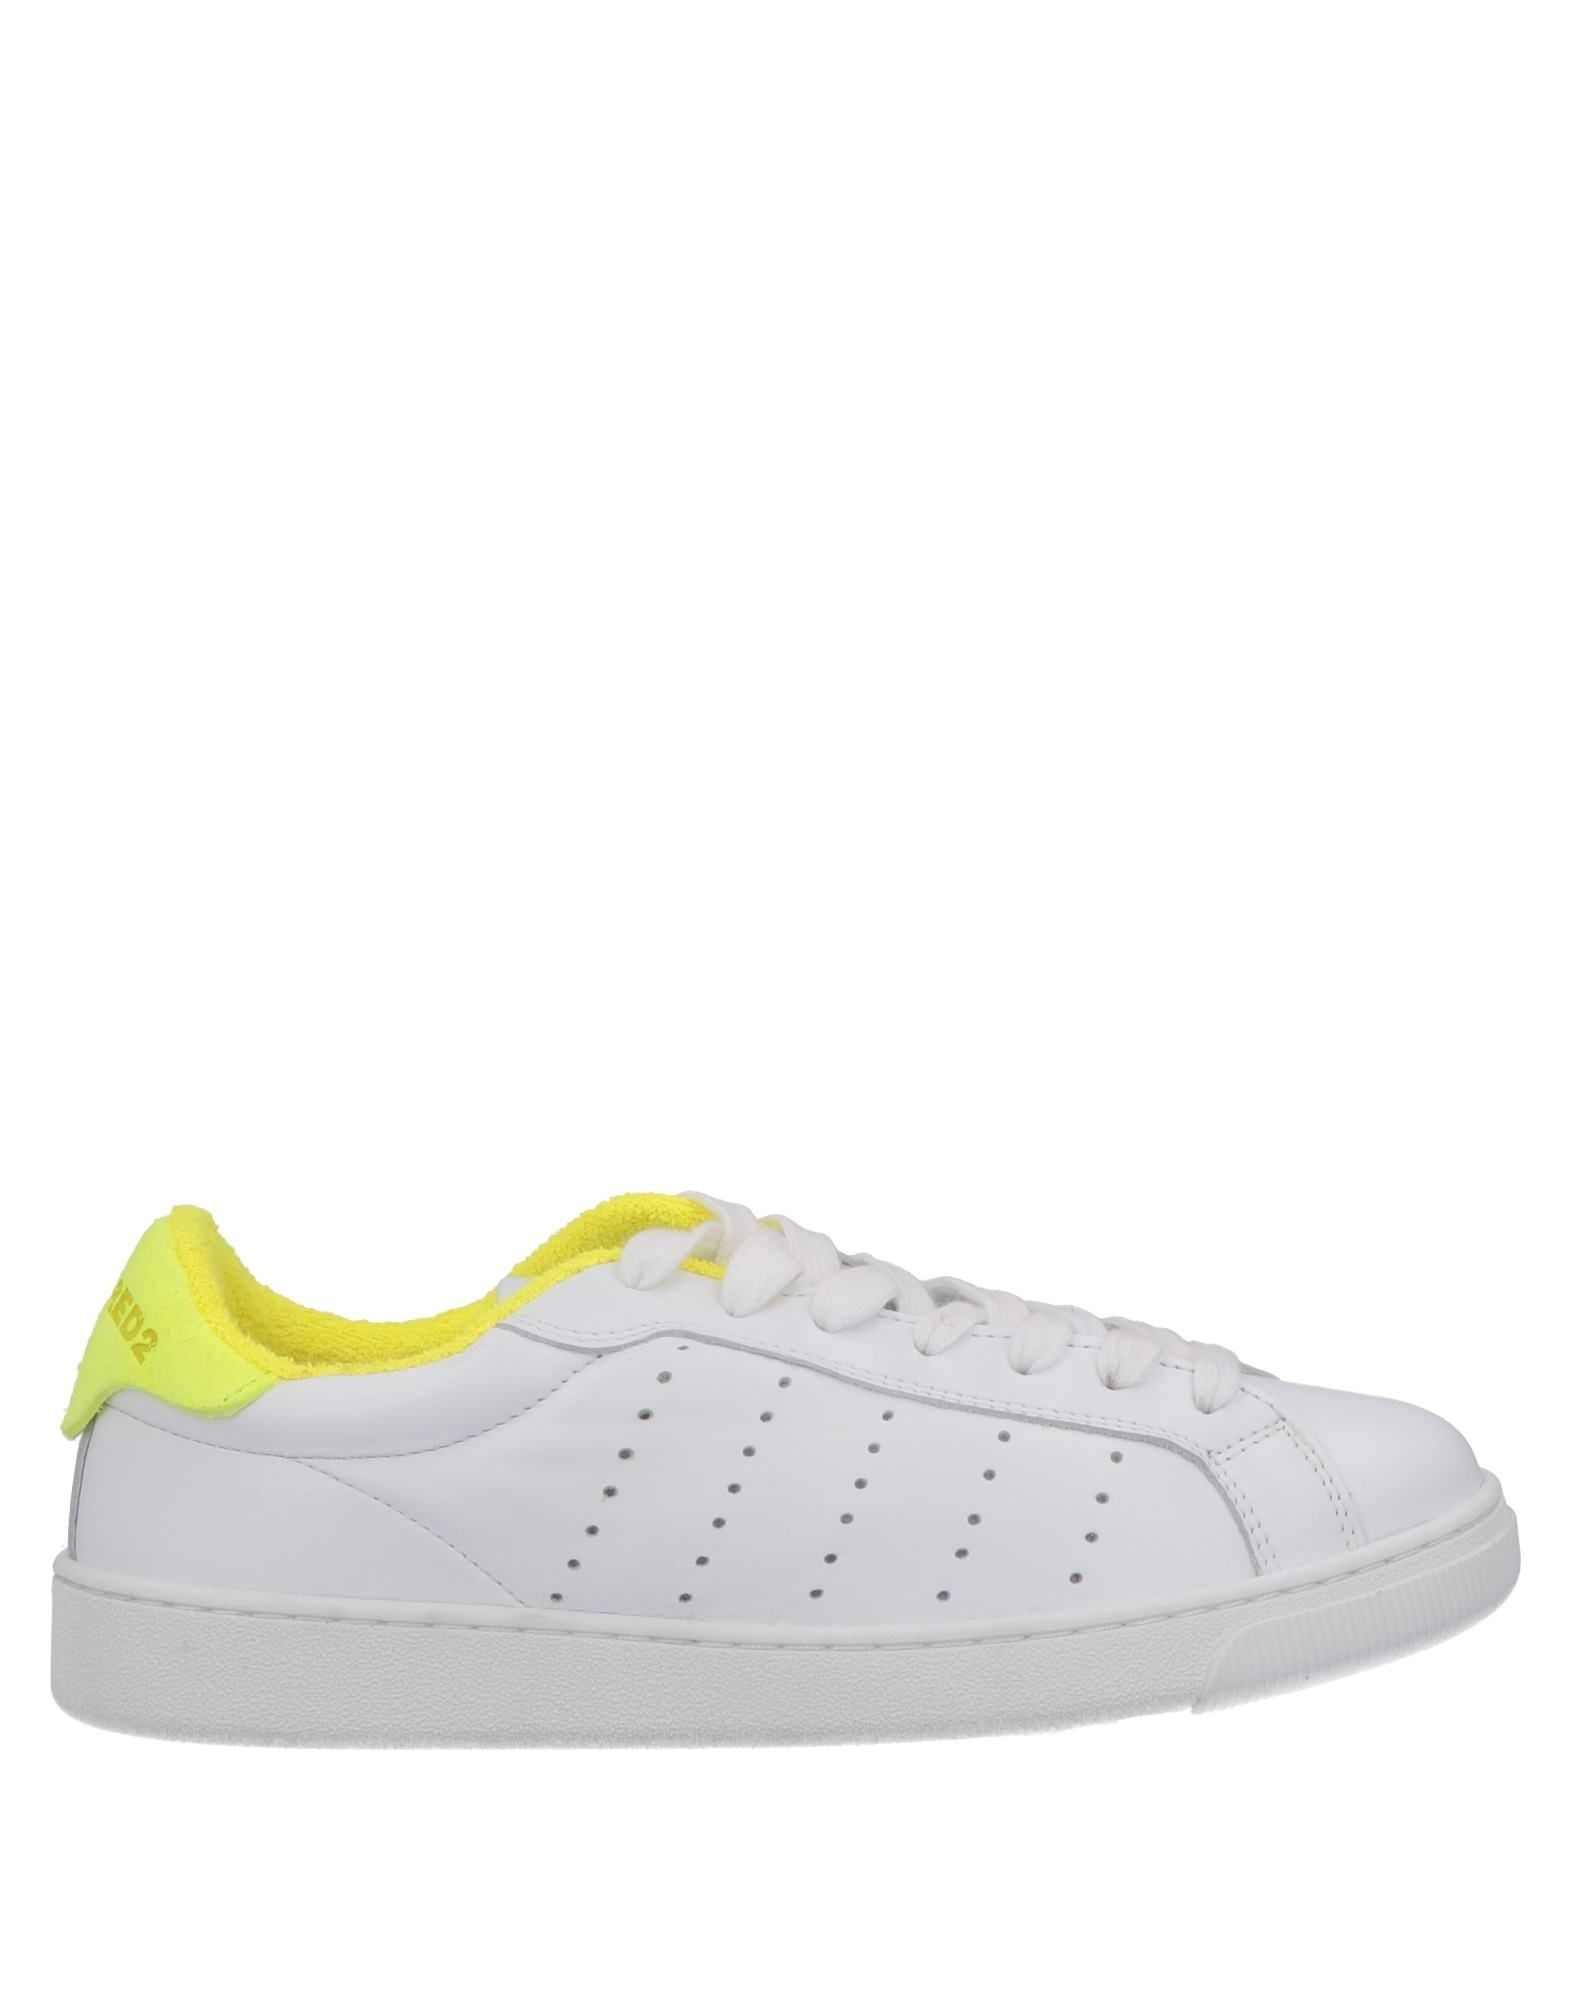 dsquared2 shoes yellow